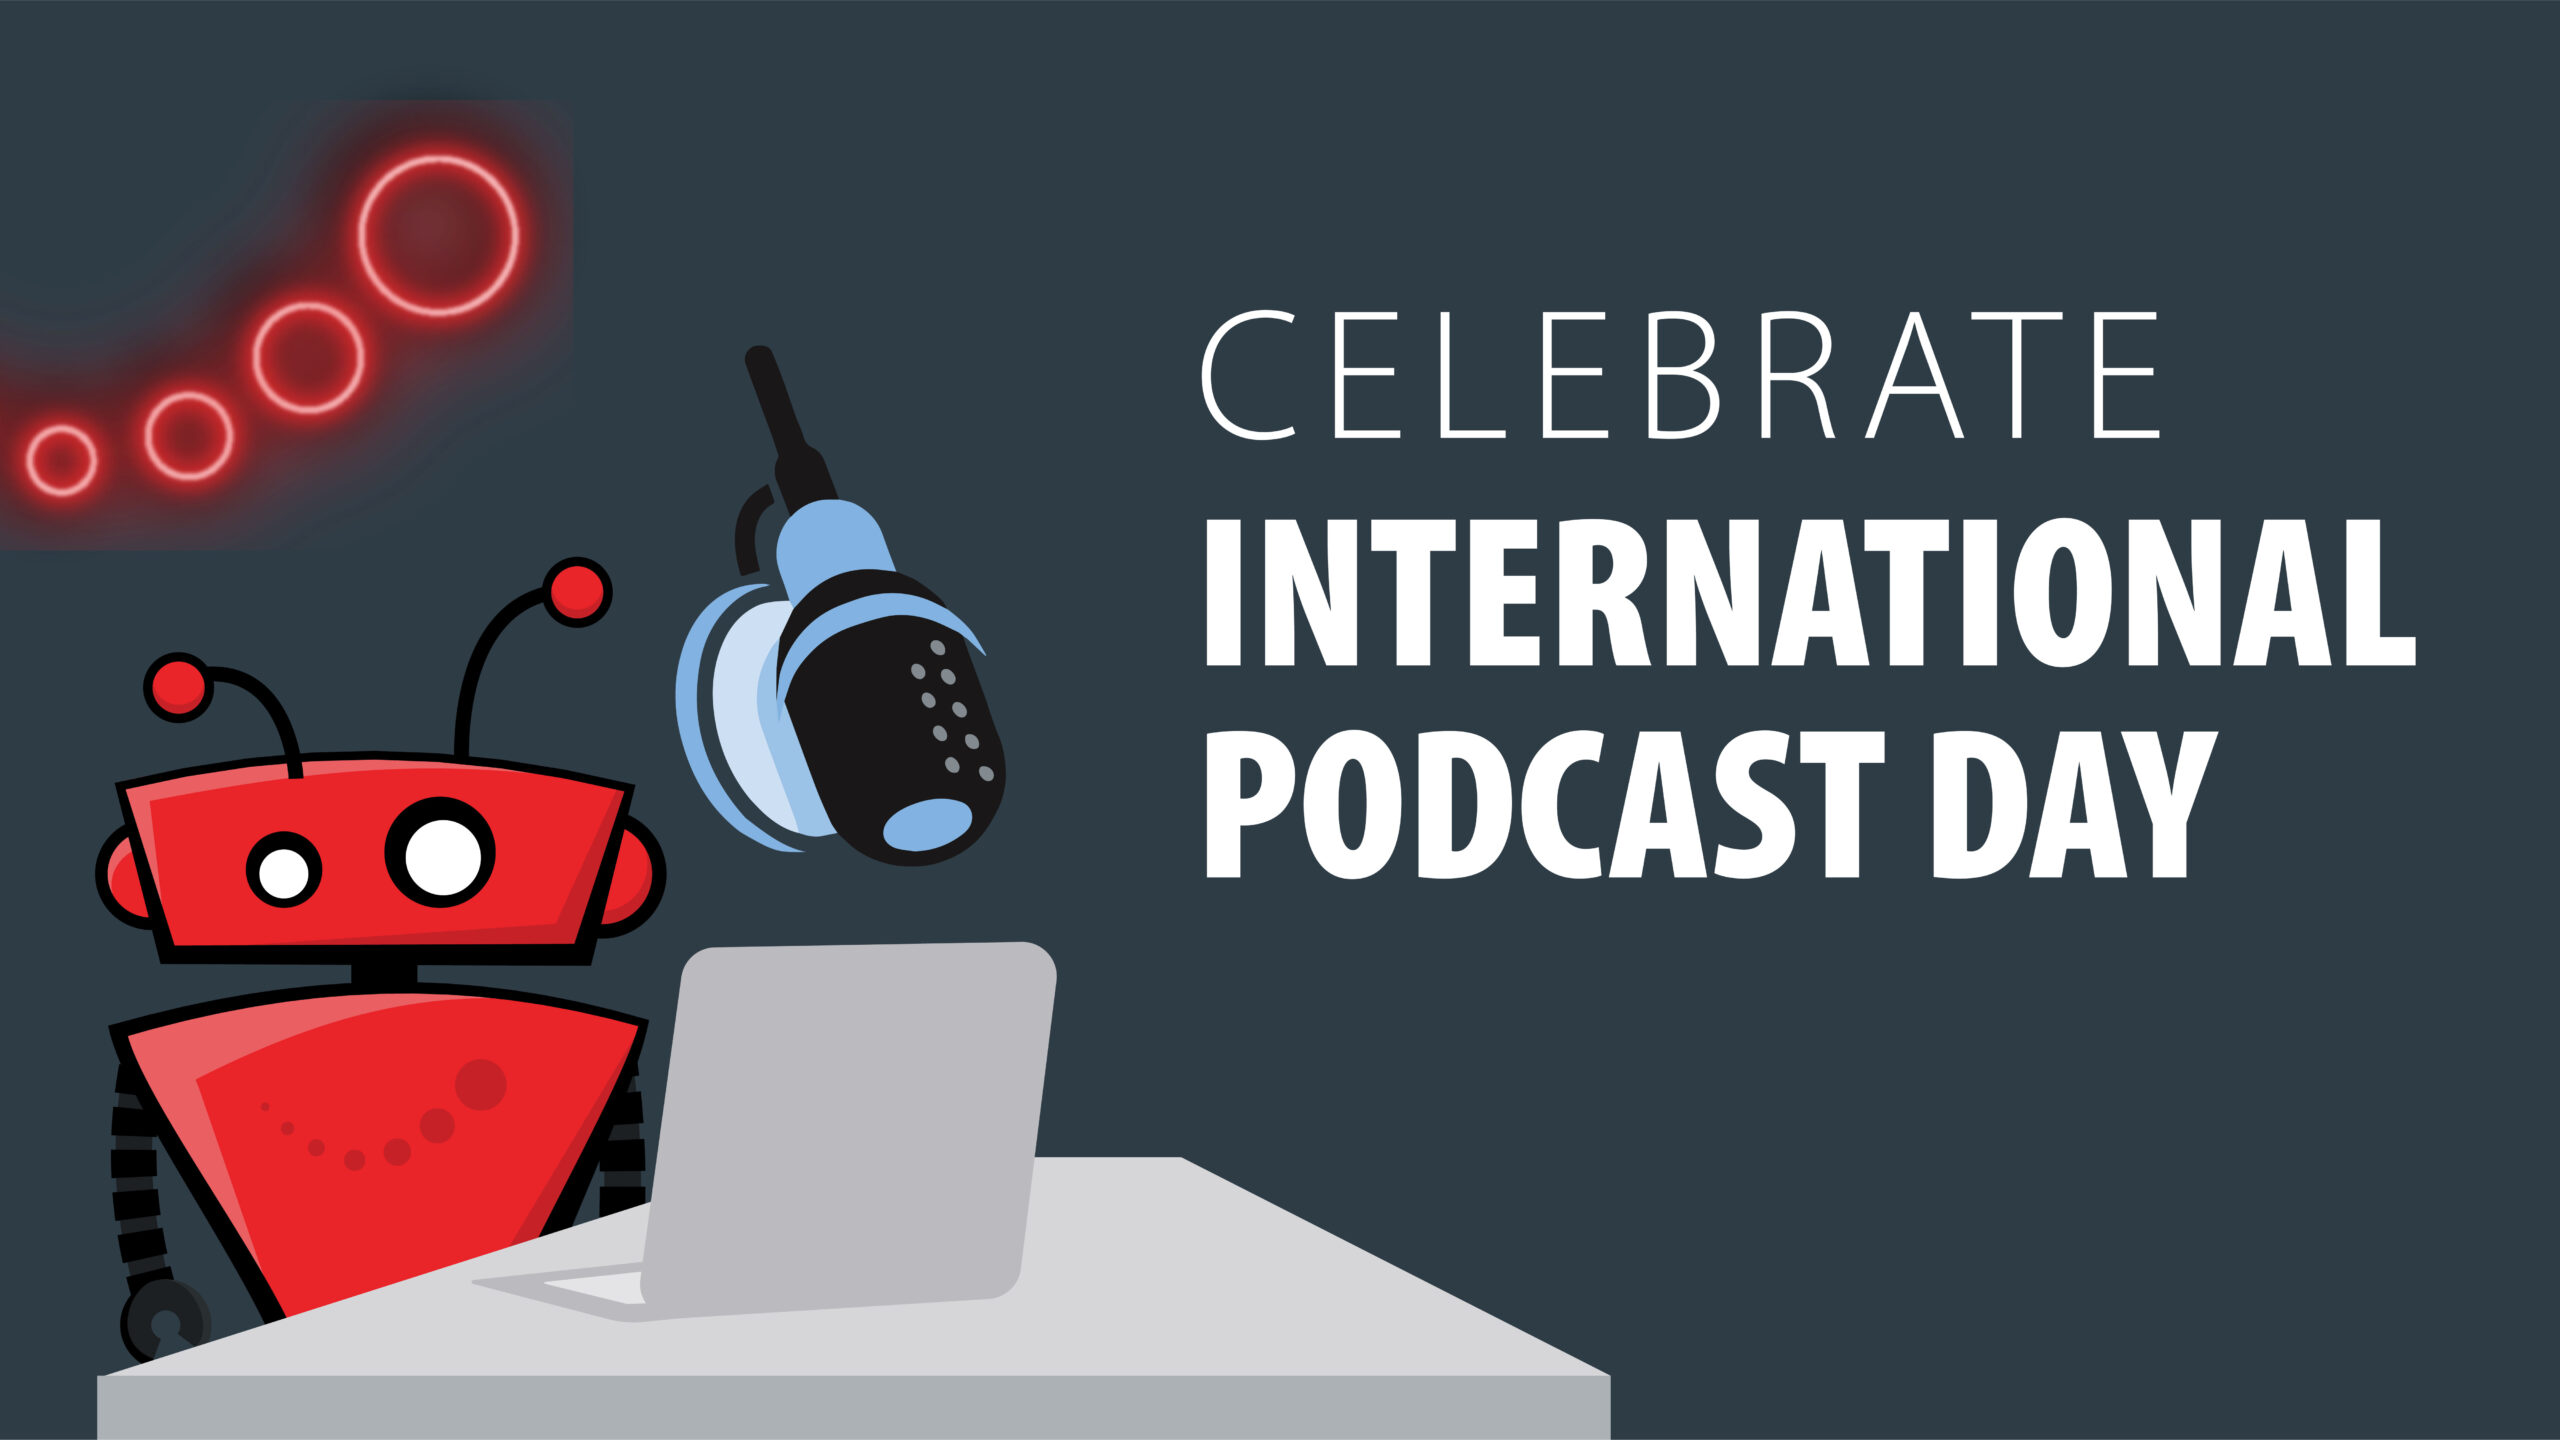 Podcasts are Taking Over the World! Happy International Podcast Day!